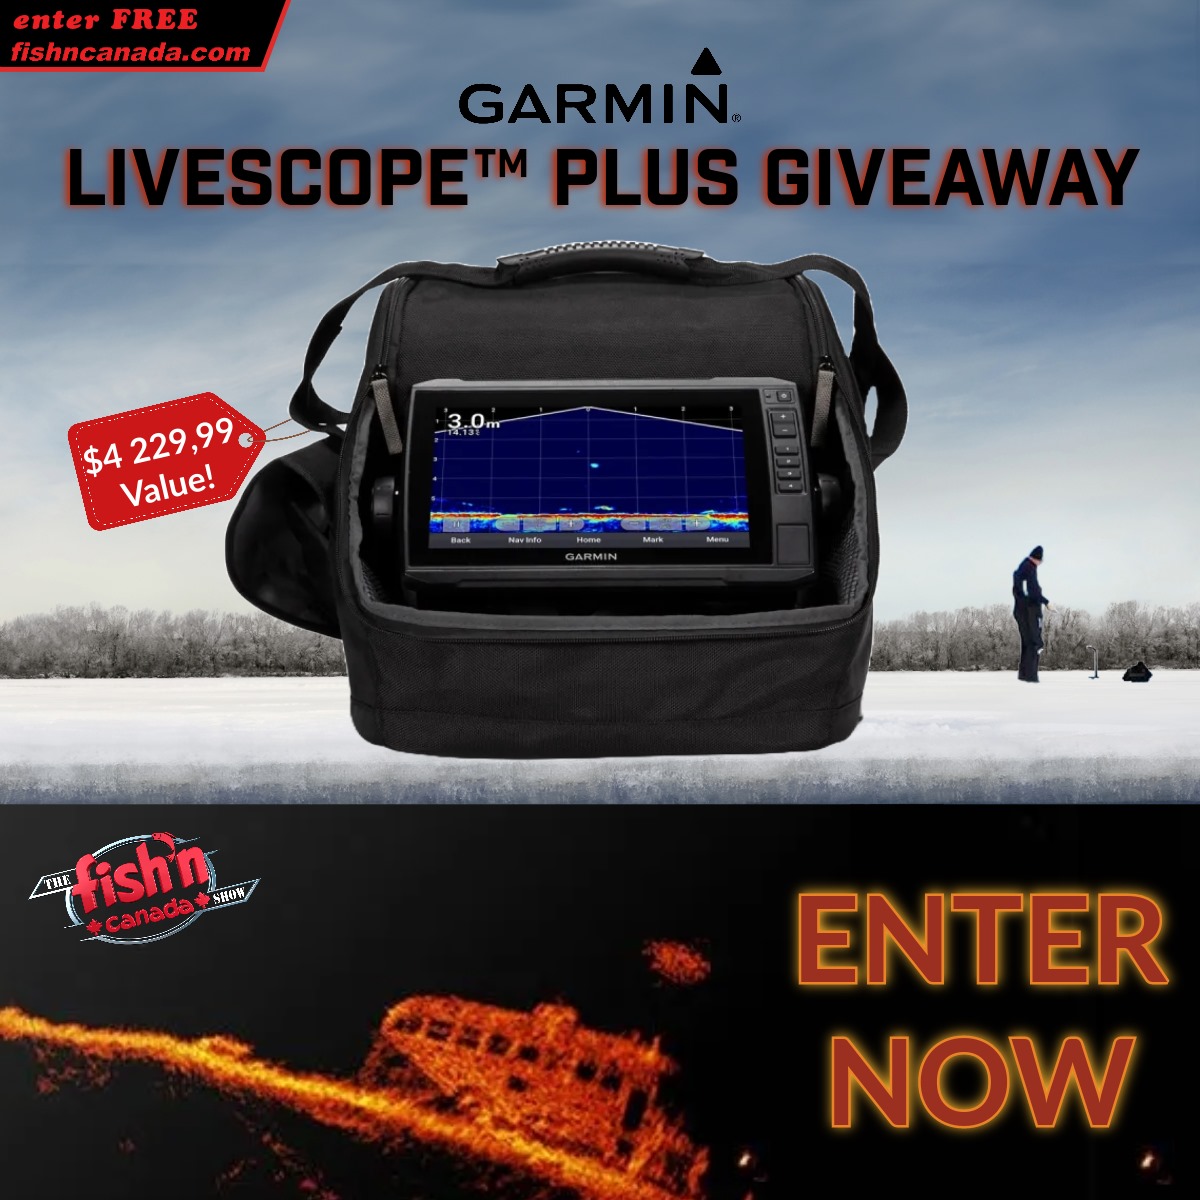 WIN A GARMIN LIVESCOPE BUNDLE ‼️ Yup, this is real life! We